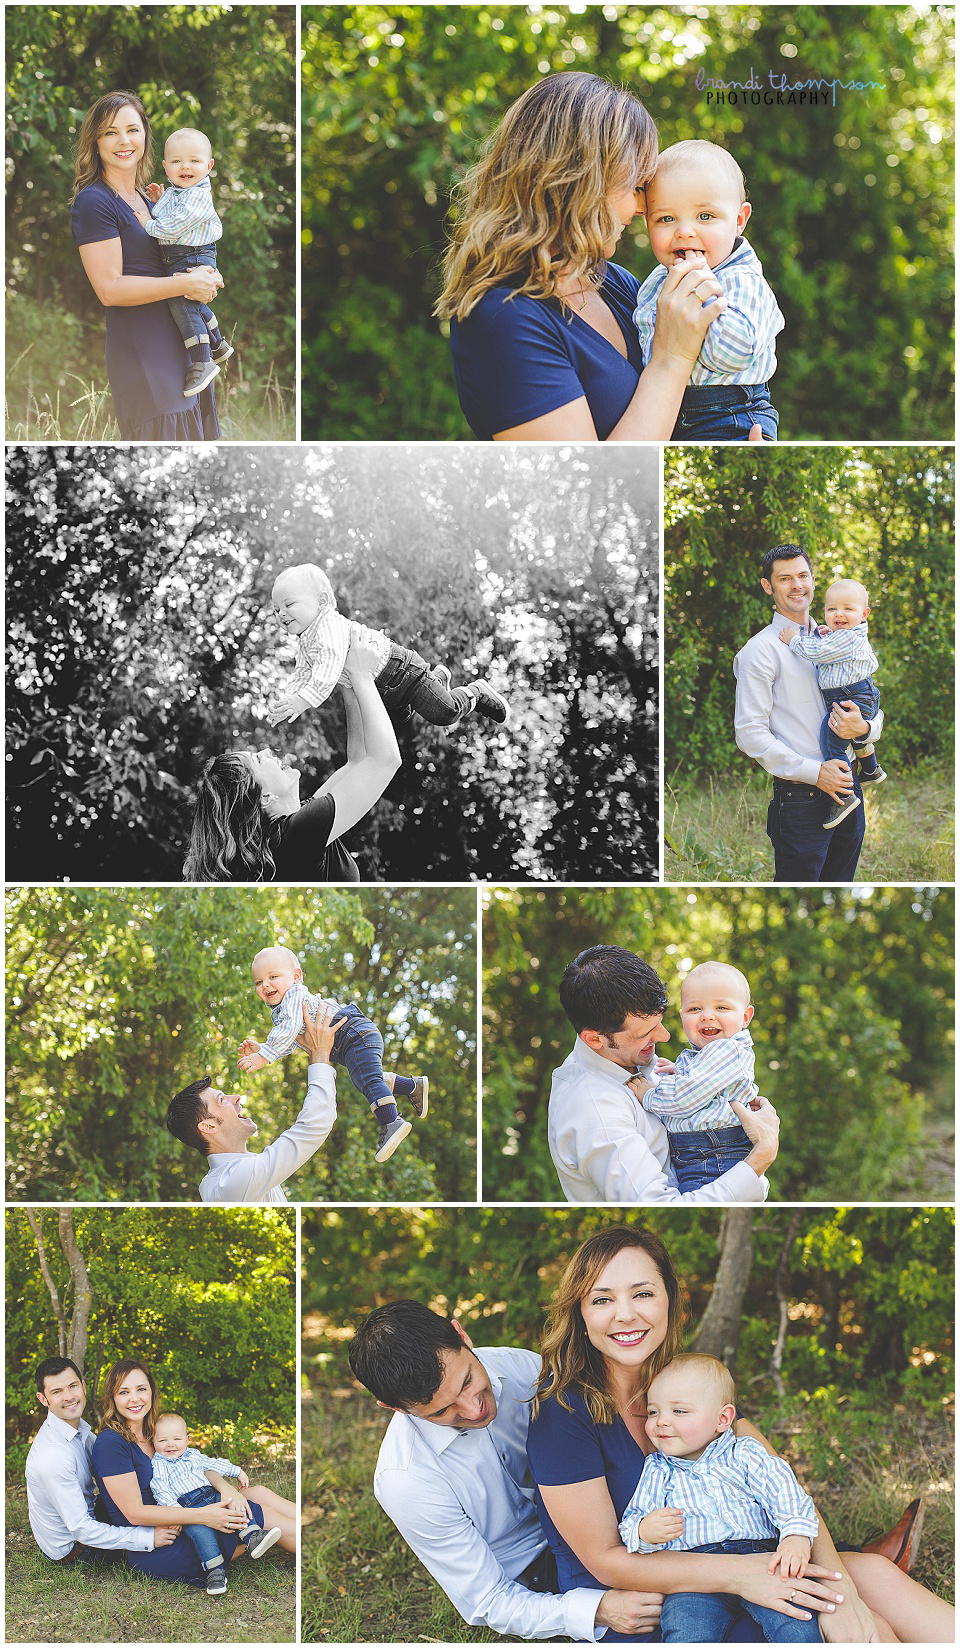 outdoor family photos at arbor hills nature preserve in plano, tx with a one year old baby boy